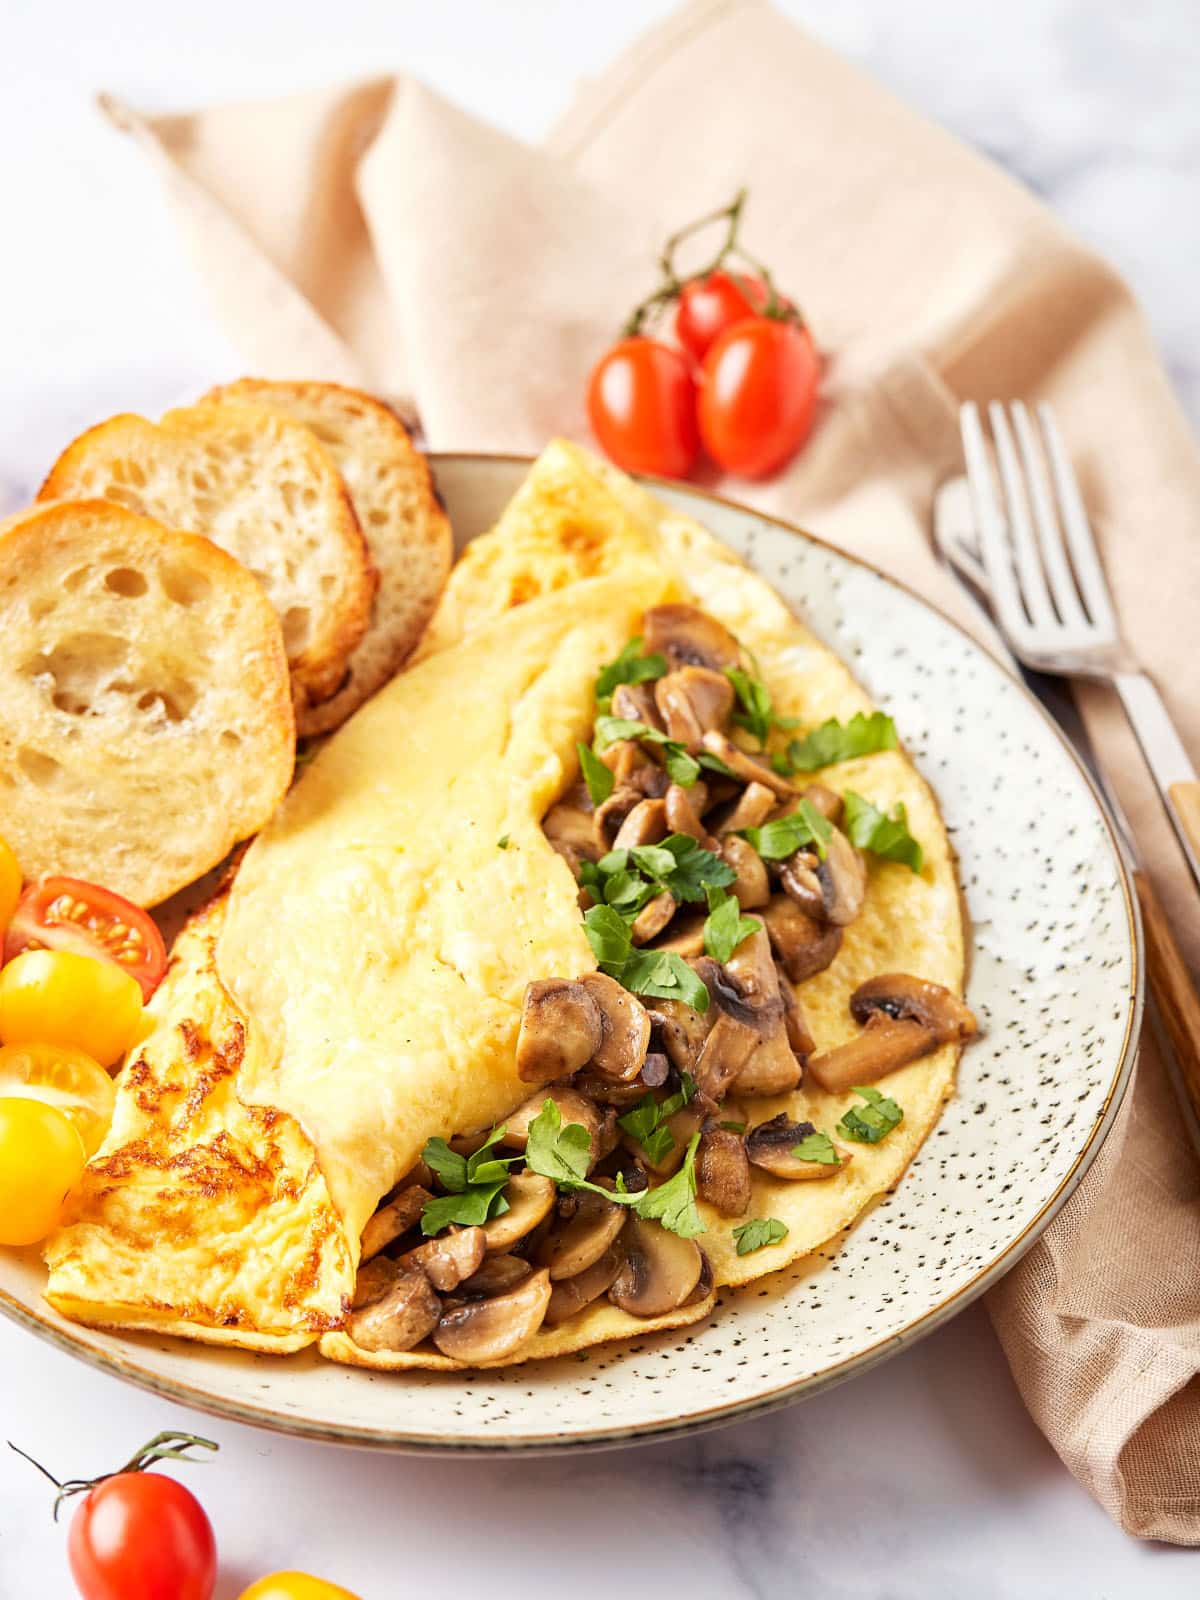 There is no doubt that omelets are one of the most popular egg dishes around the world. An omelet is a dish made from beaten eggs fried with butter or oil in a frying pan.